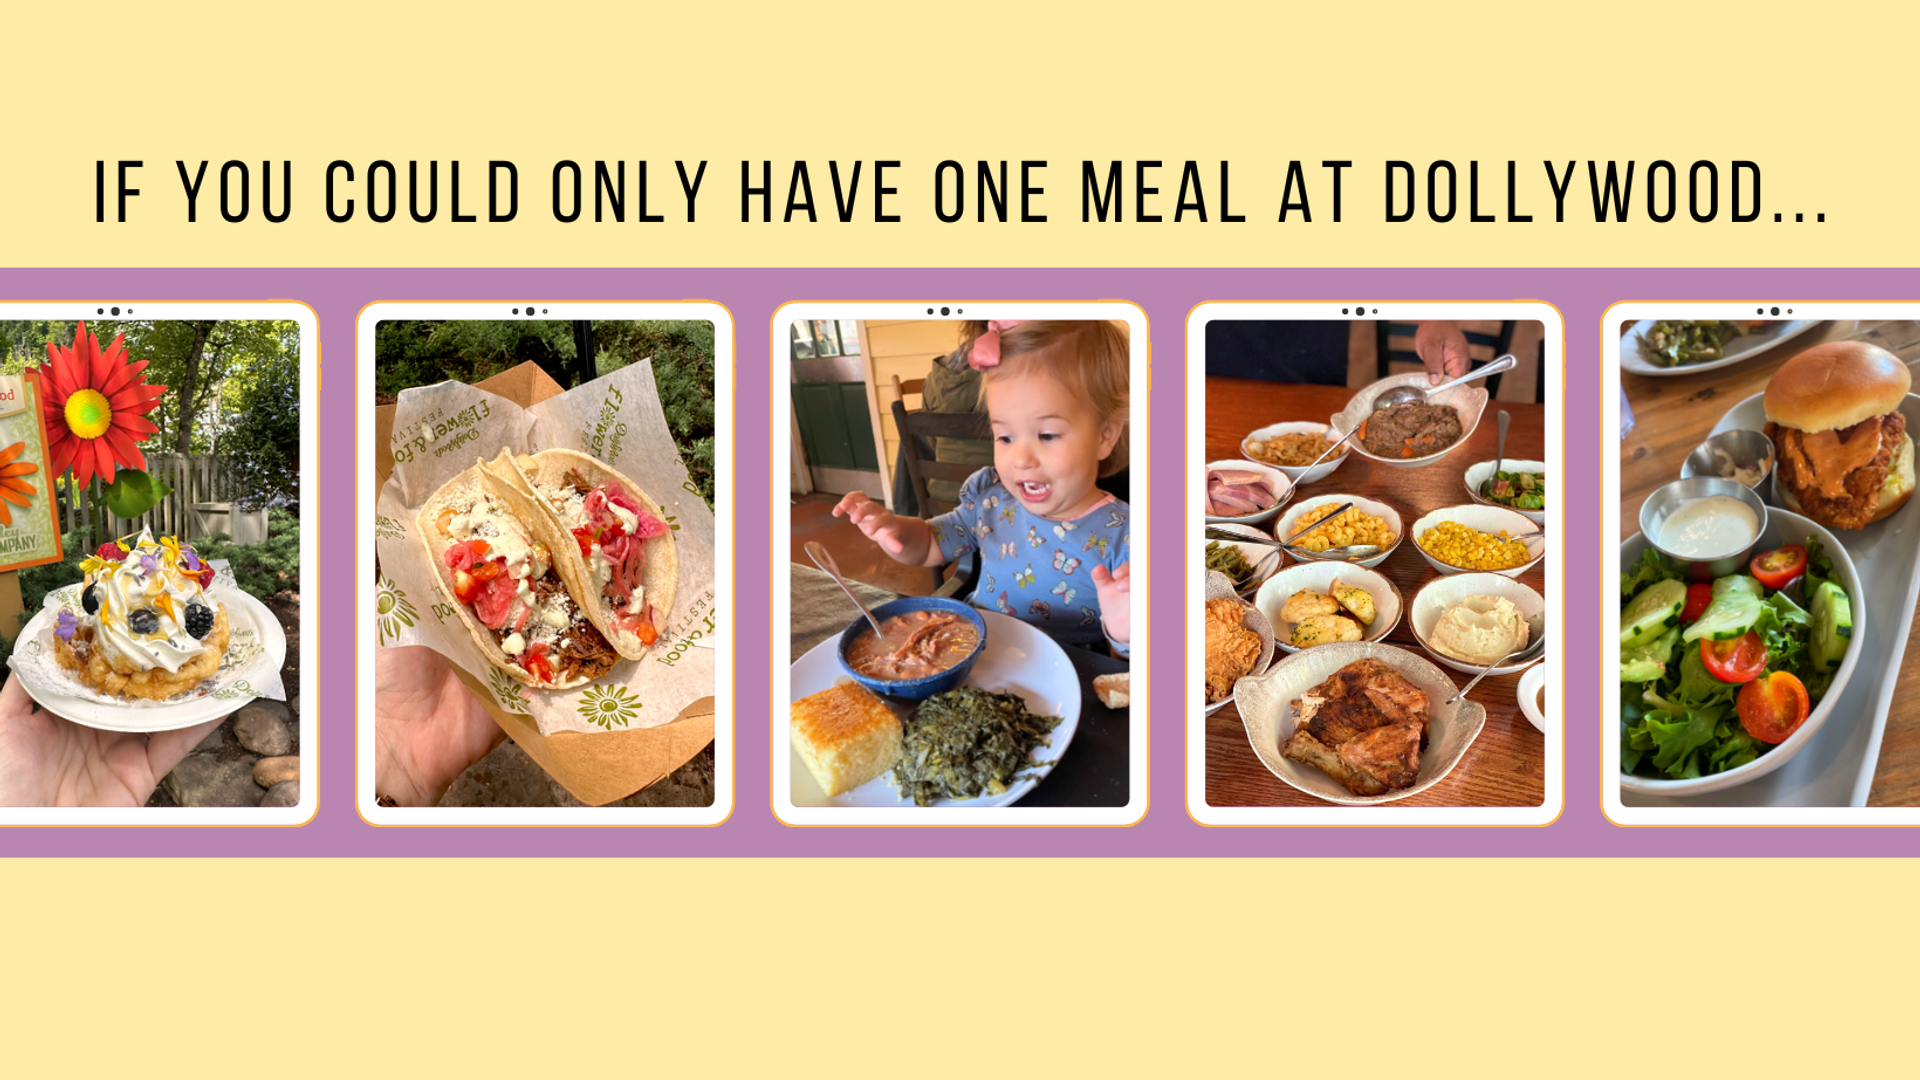 “If you could only eat one meal at Dollywood…” 